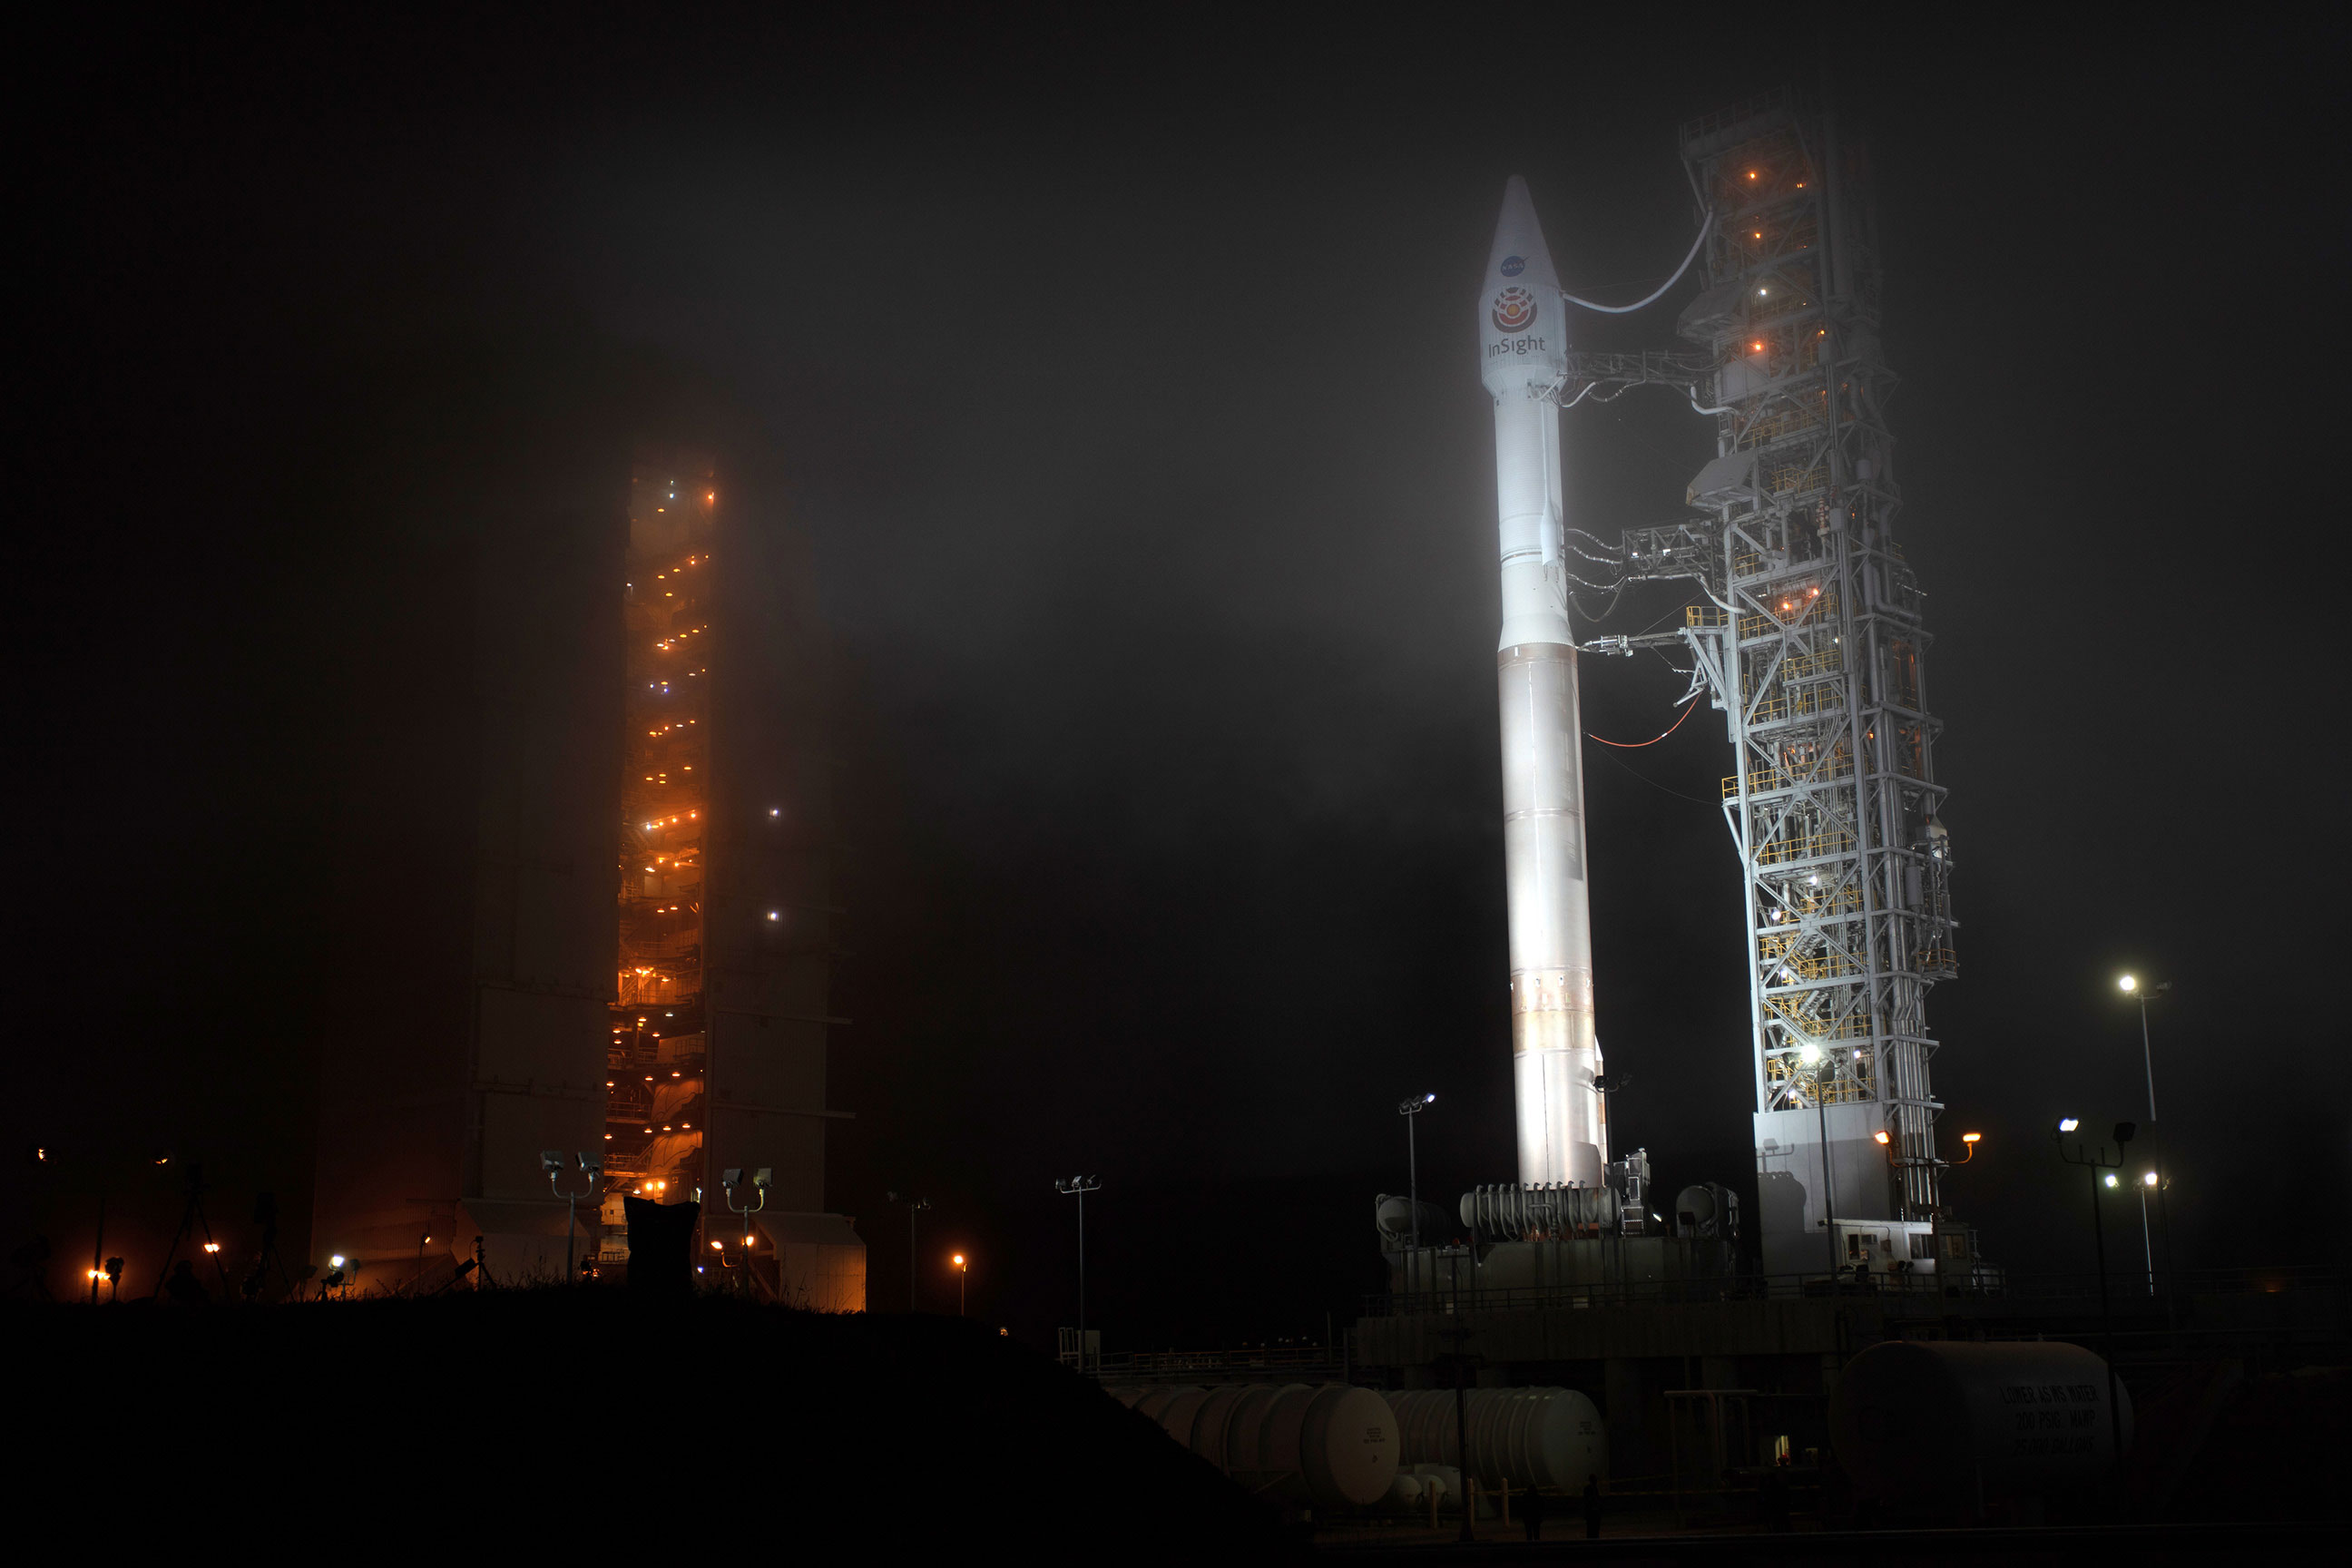 InSight awaiting launch at Space Launch Complex 3 on a foggy night at Vandenberg Air Force Base in California.  Photo: Jon Brack